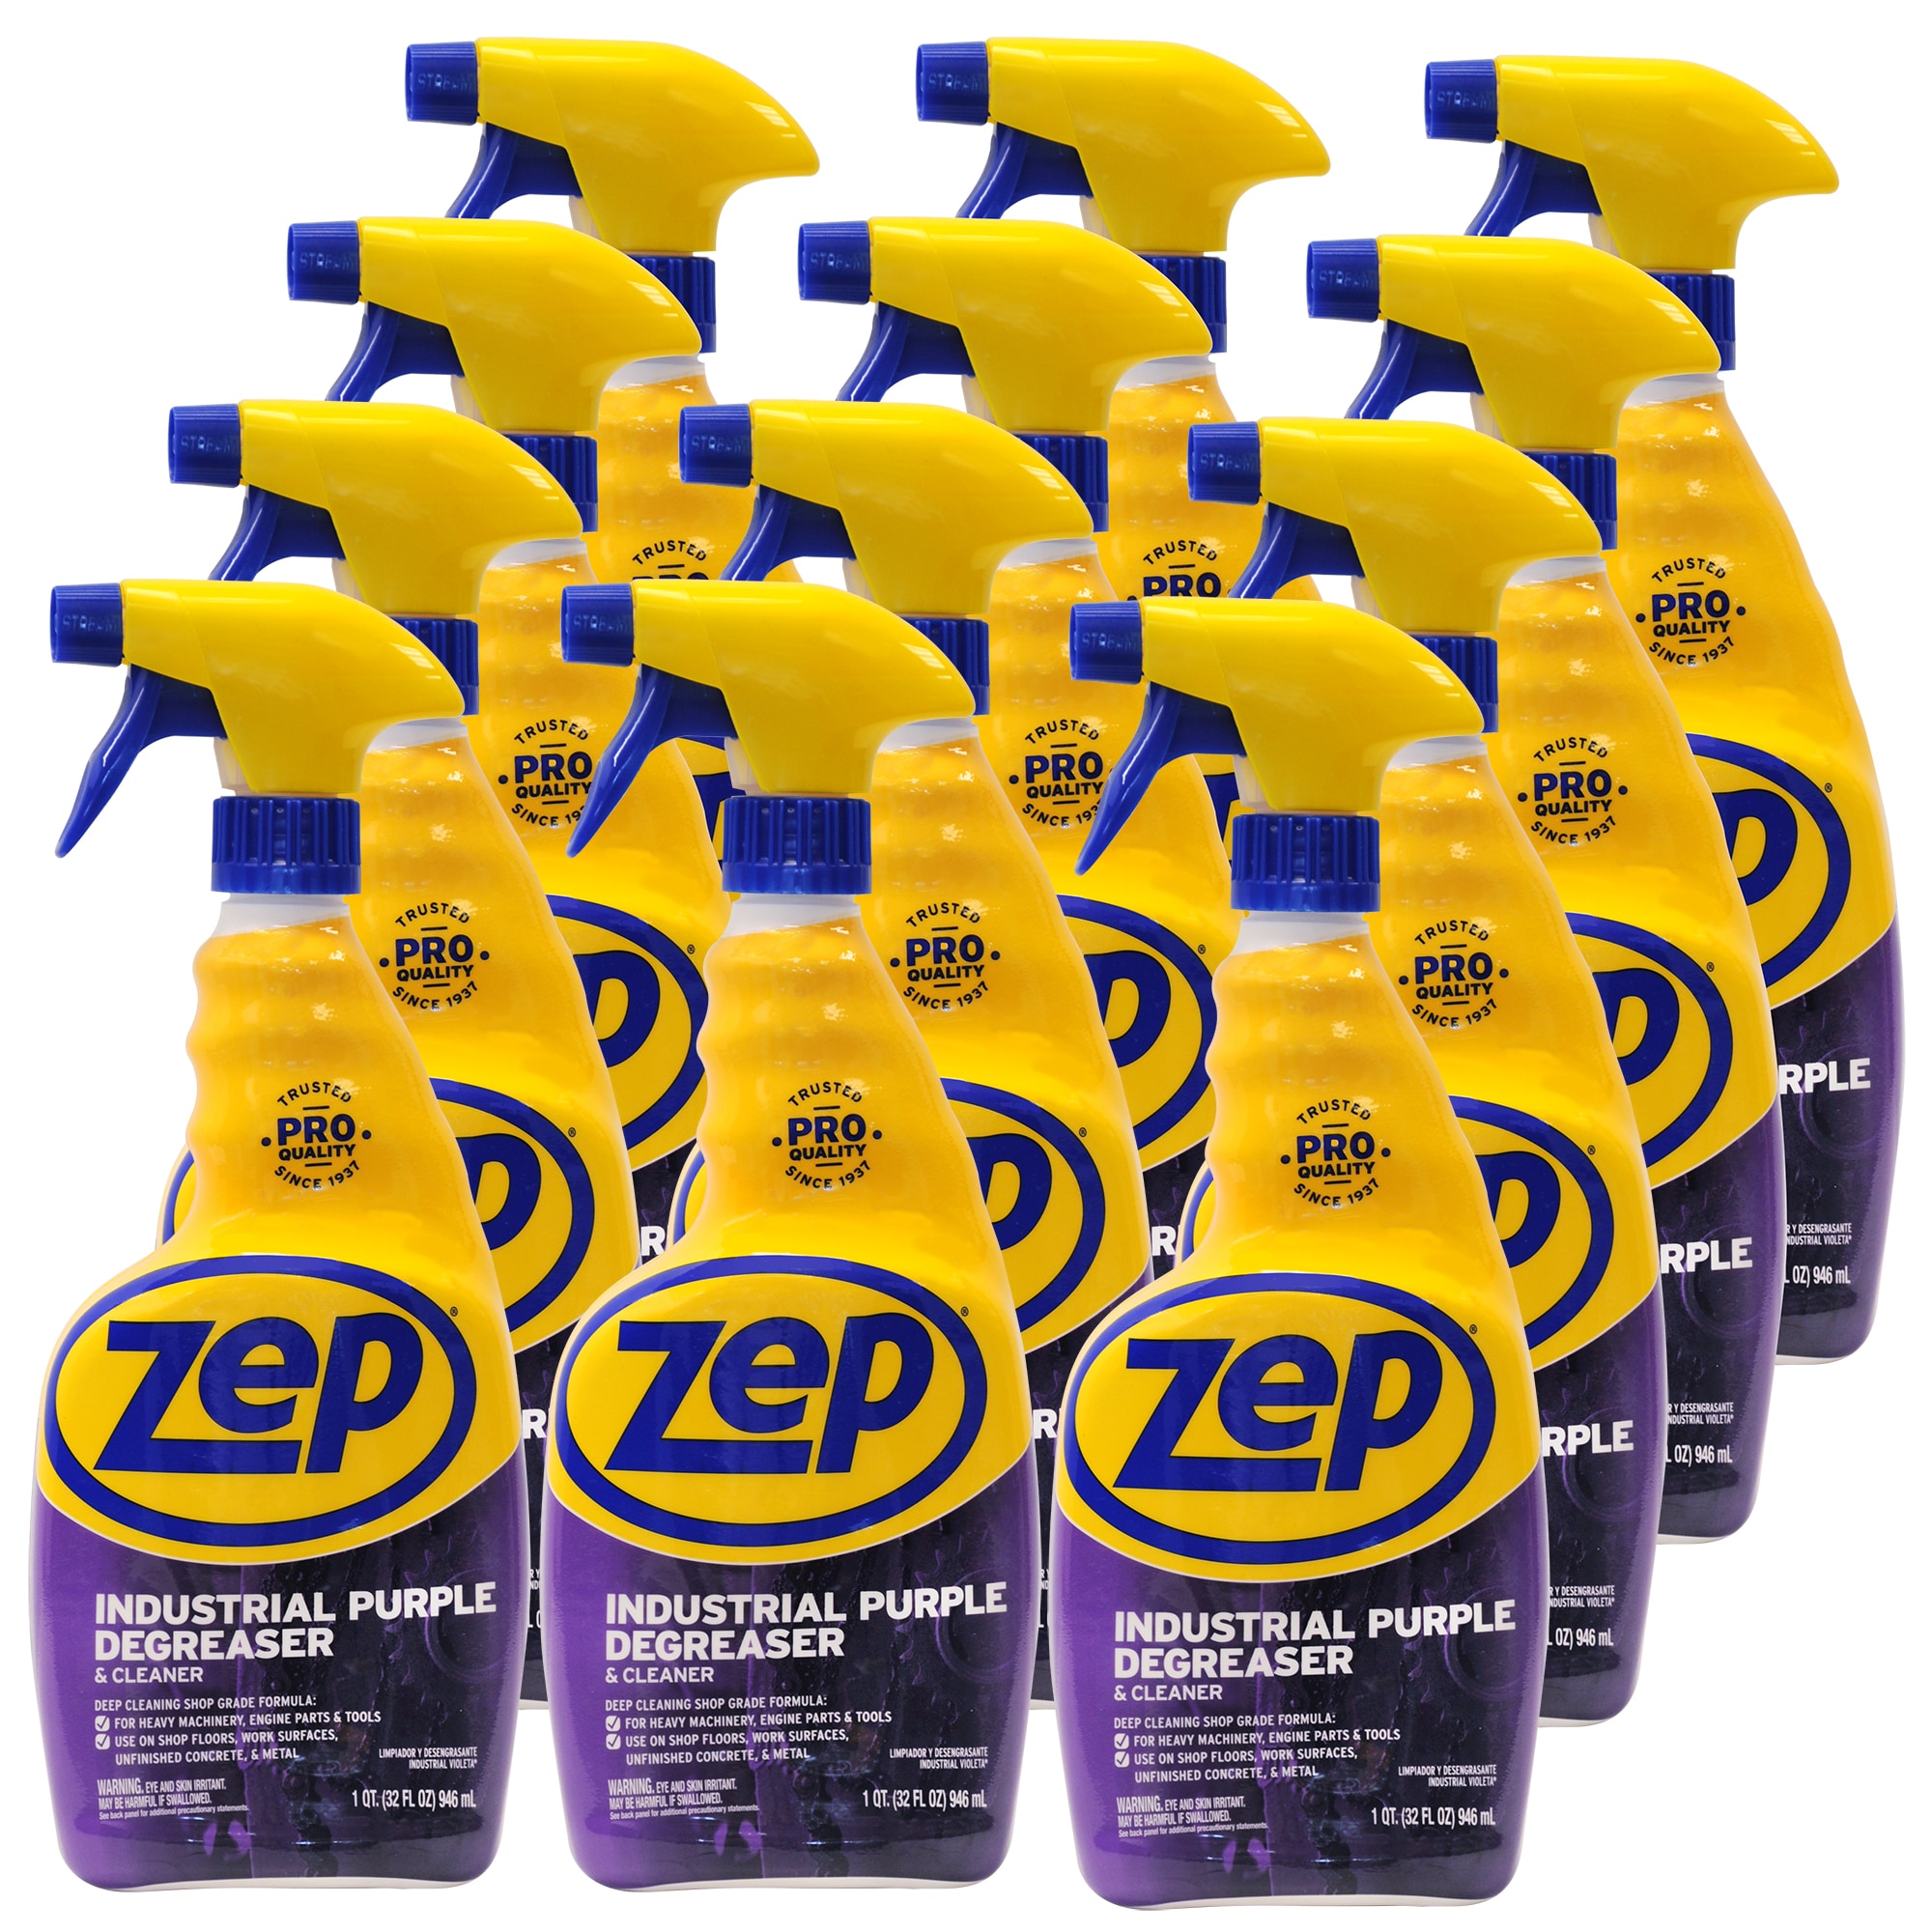 Zep Heavy-Duty 24 Fluid Ounces Degreaser in the Degreasers